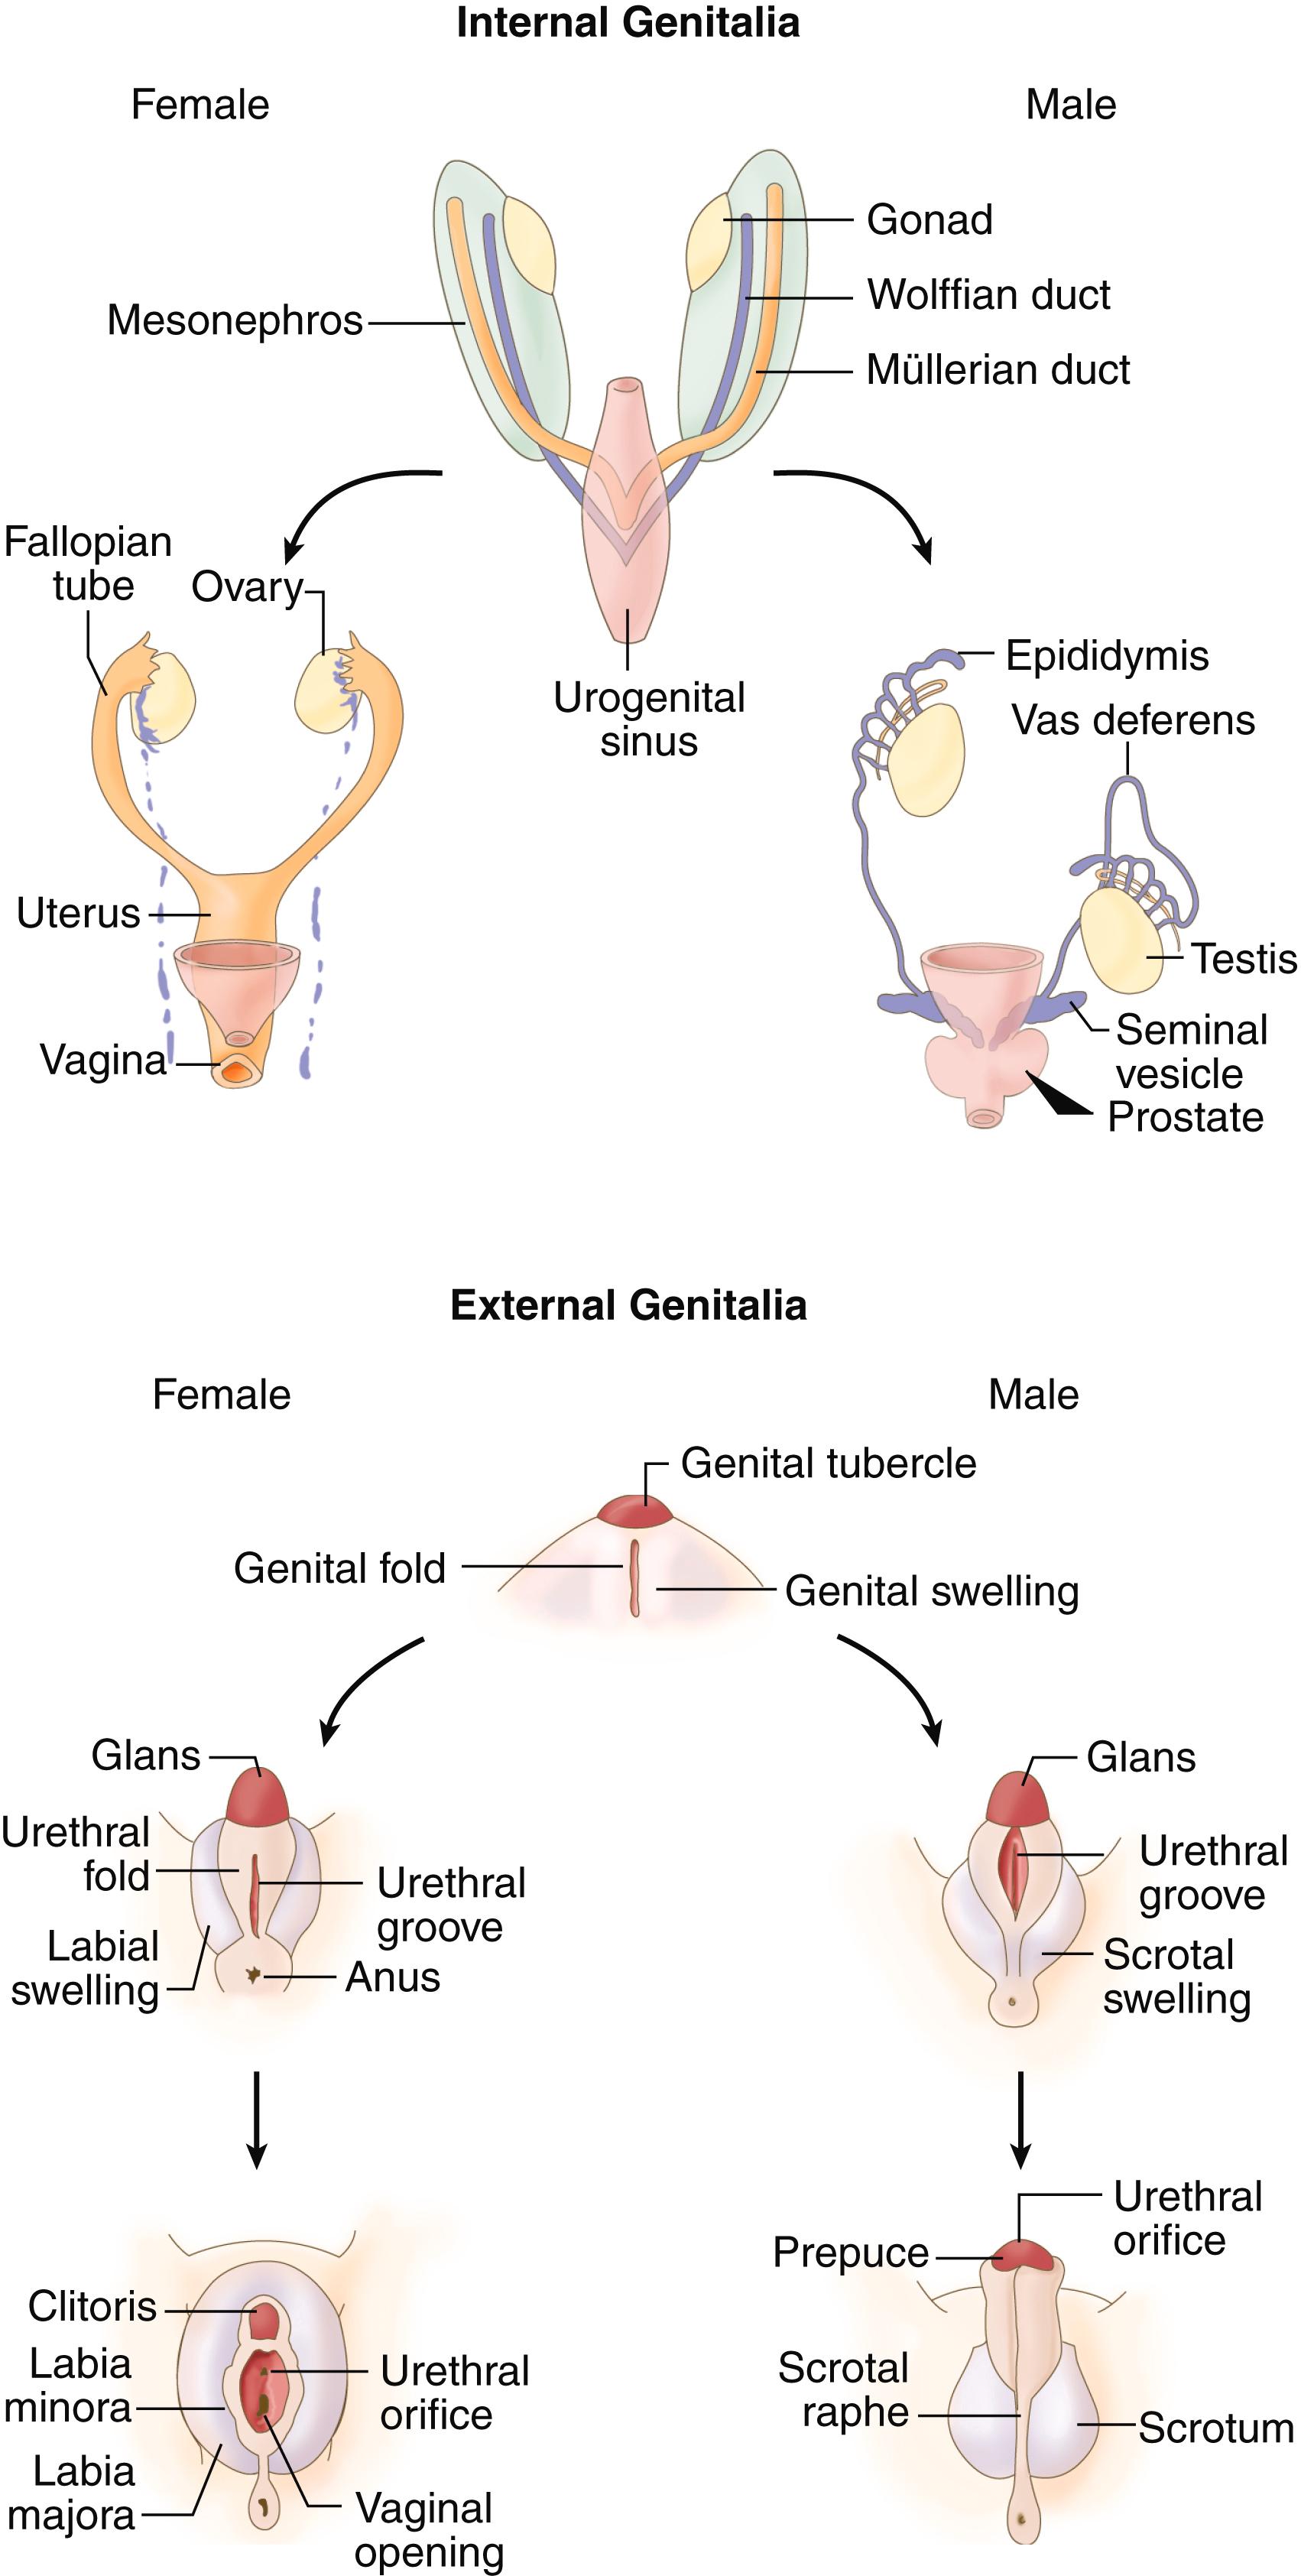 FIGURE 214-2, Differentiation of the internal and external genitalia of the human fetus.